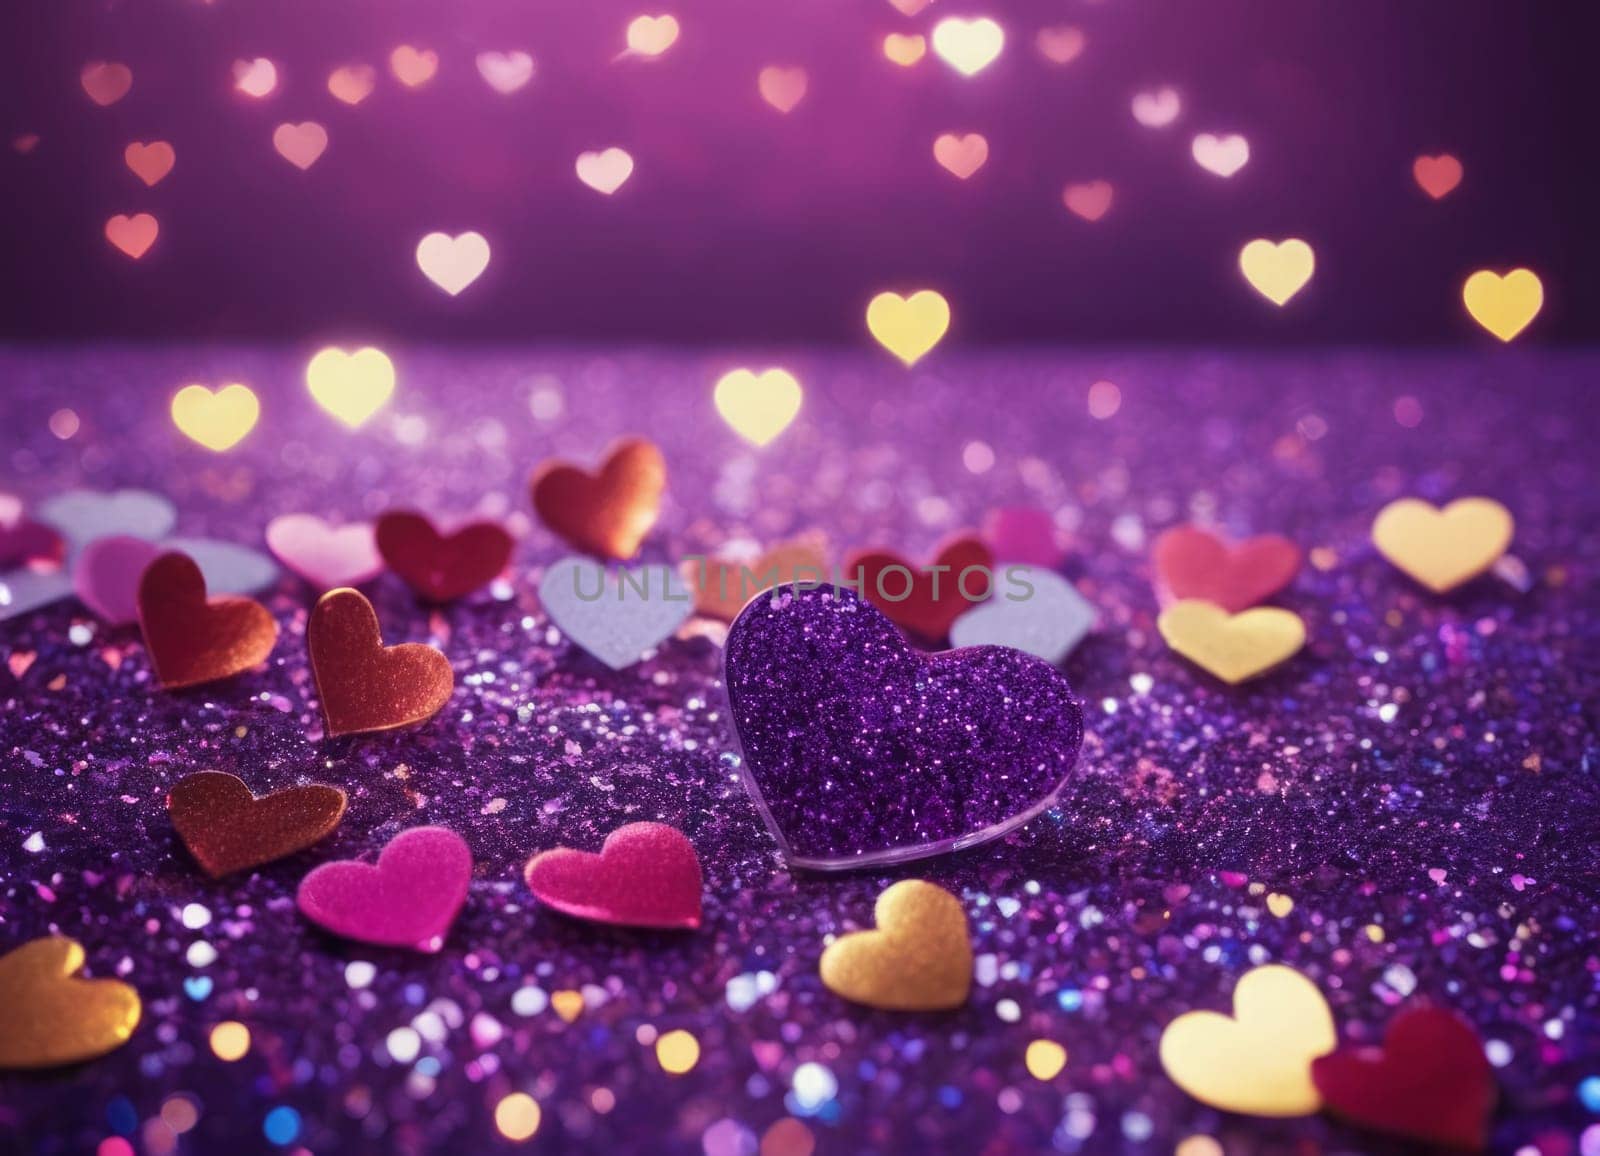 Hearts shine among the sparkling purple color. Valentine's Day by Andre1ns